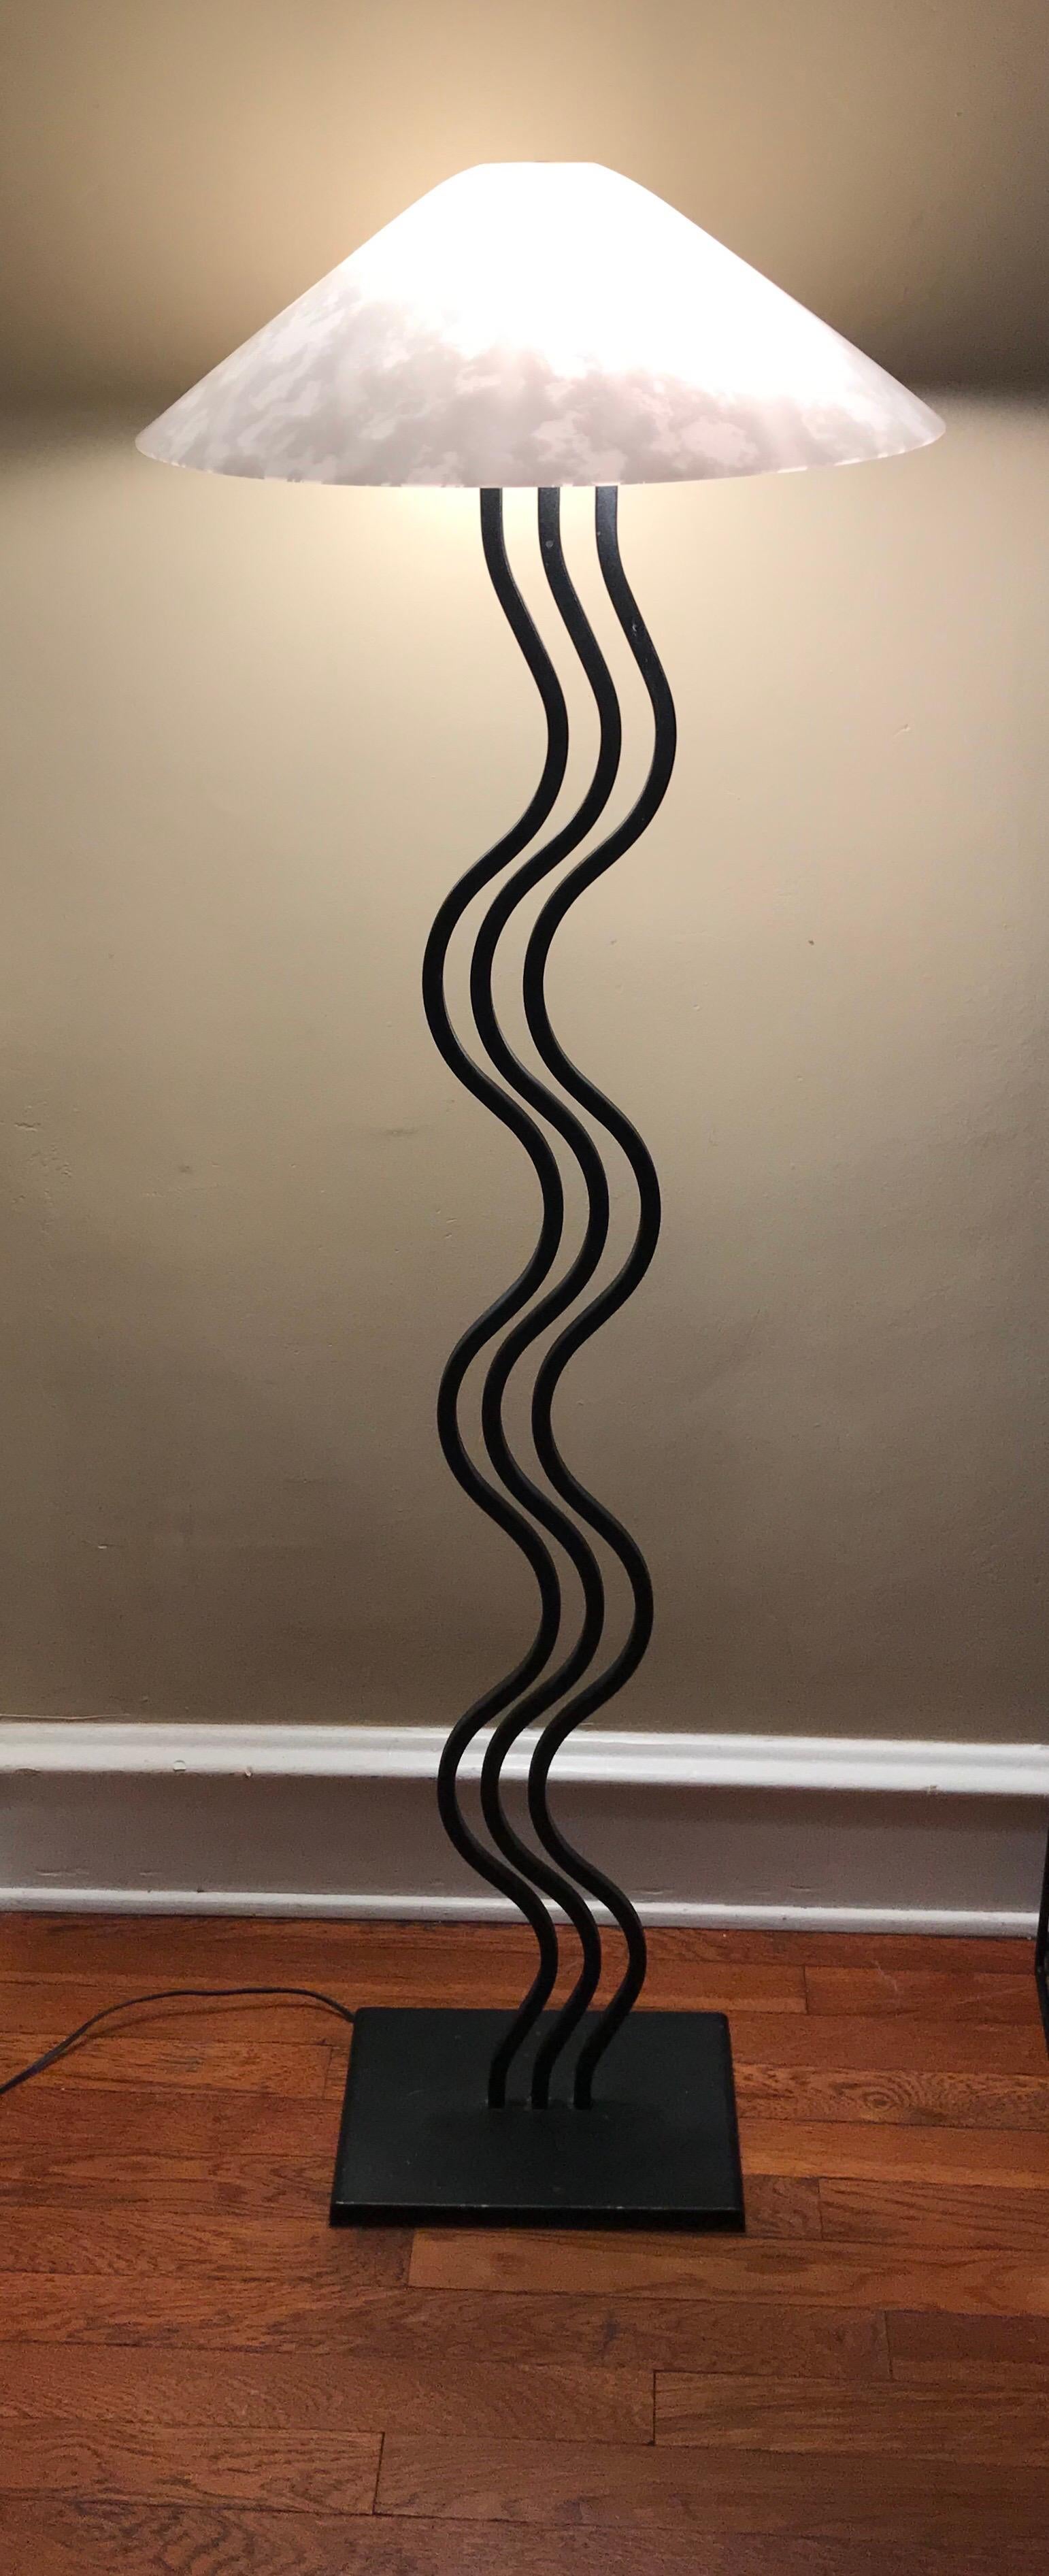 1980s Postmodern Memphis style table lamp.

Sculptural design features a series of curved metal tubular bars in a powder coated matte black finish.

Original shade included.